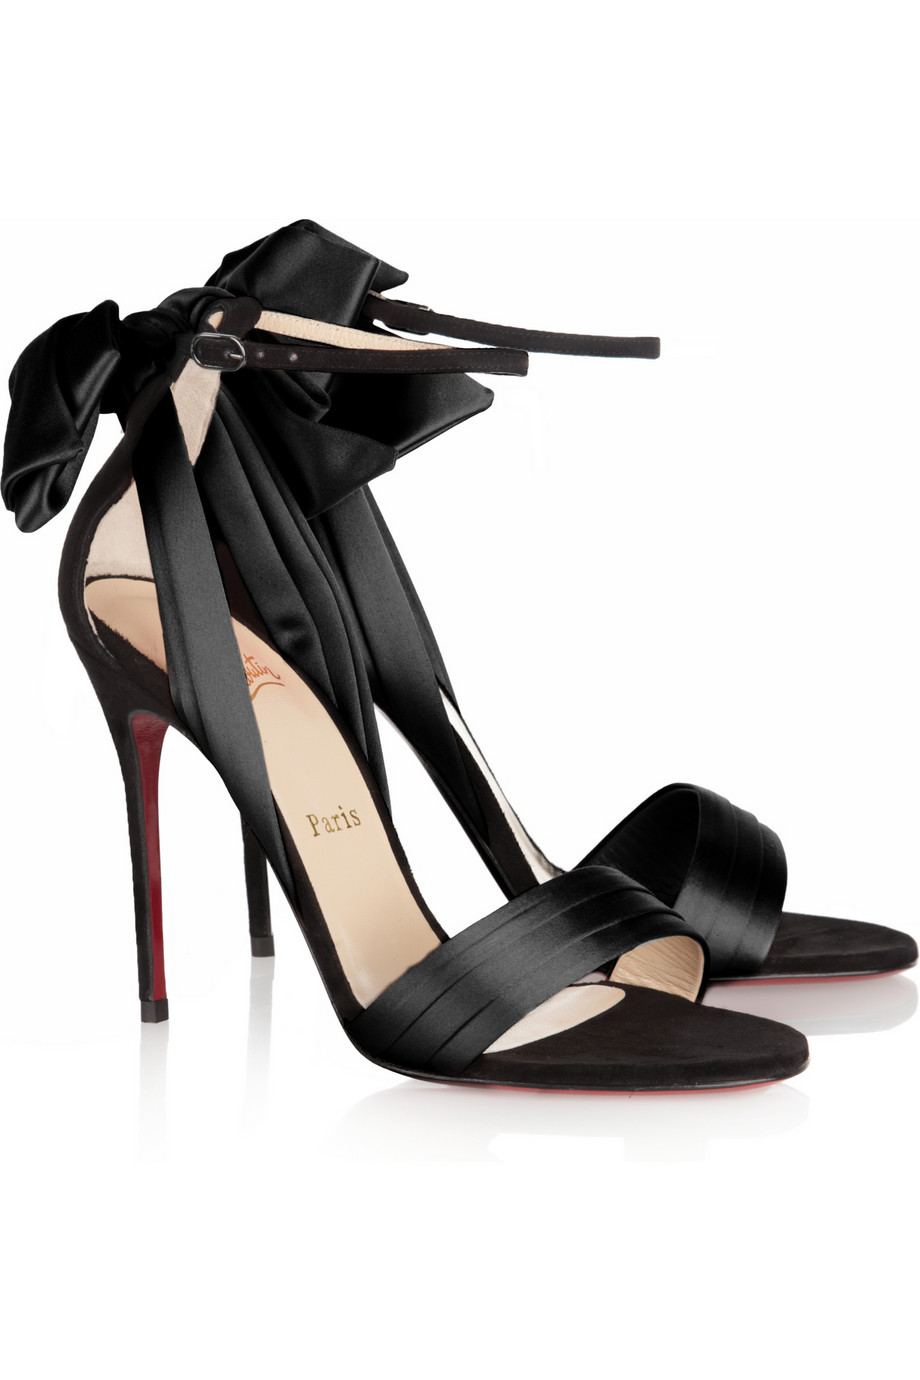 Christian Louboutin Vampanodo Satin and Suede Sandals in Black | Lyst